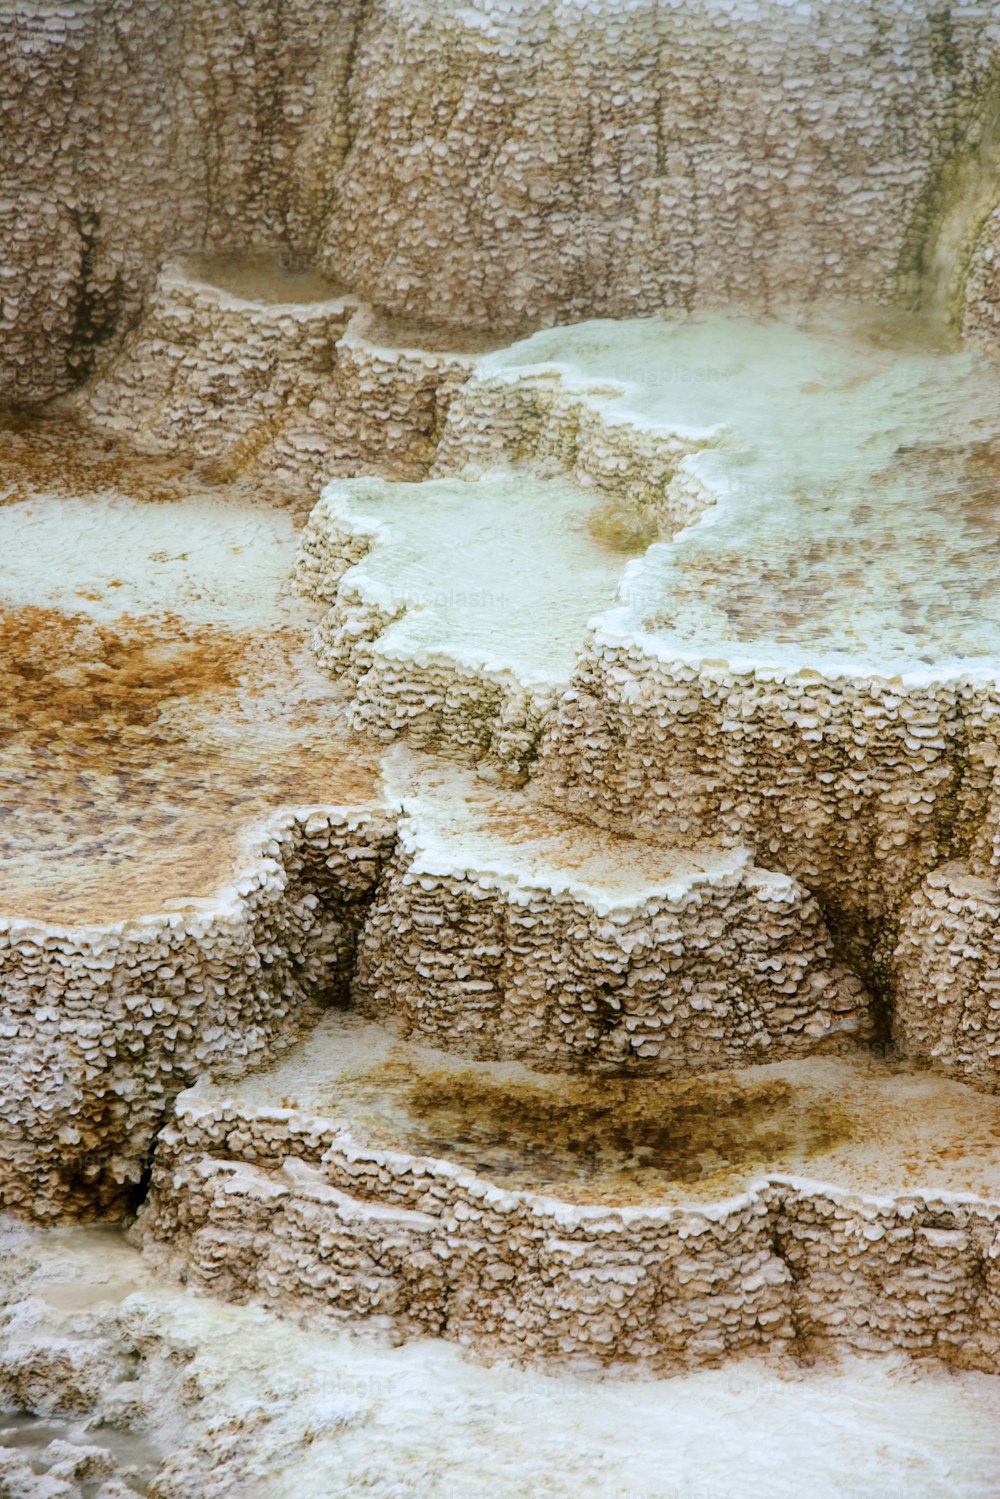 a close up of a hot spring in a desert